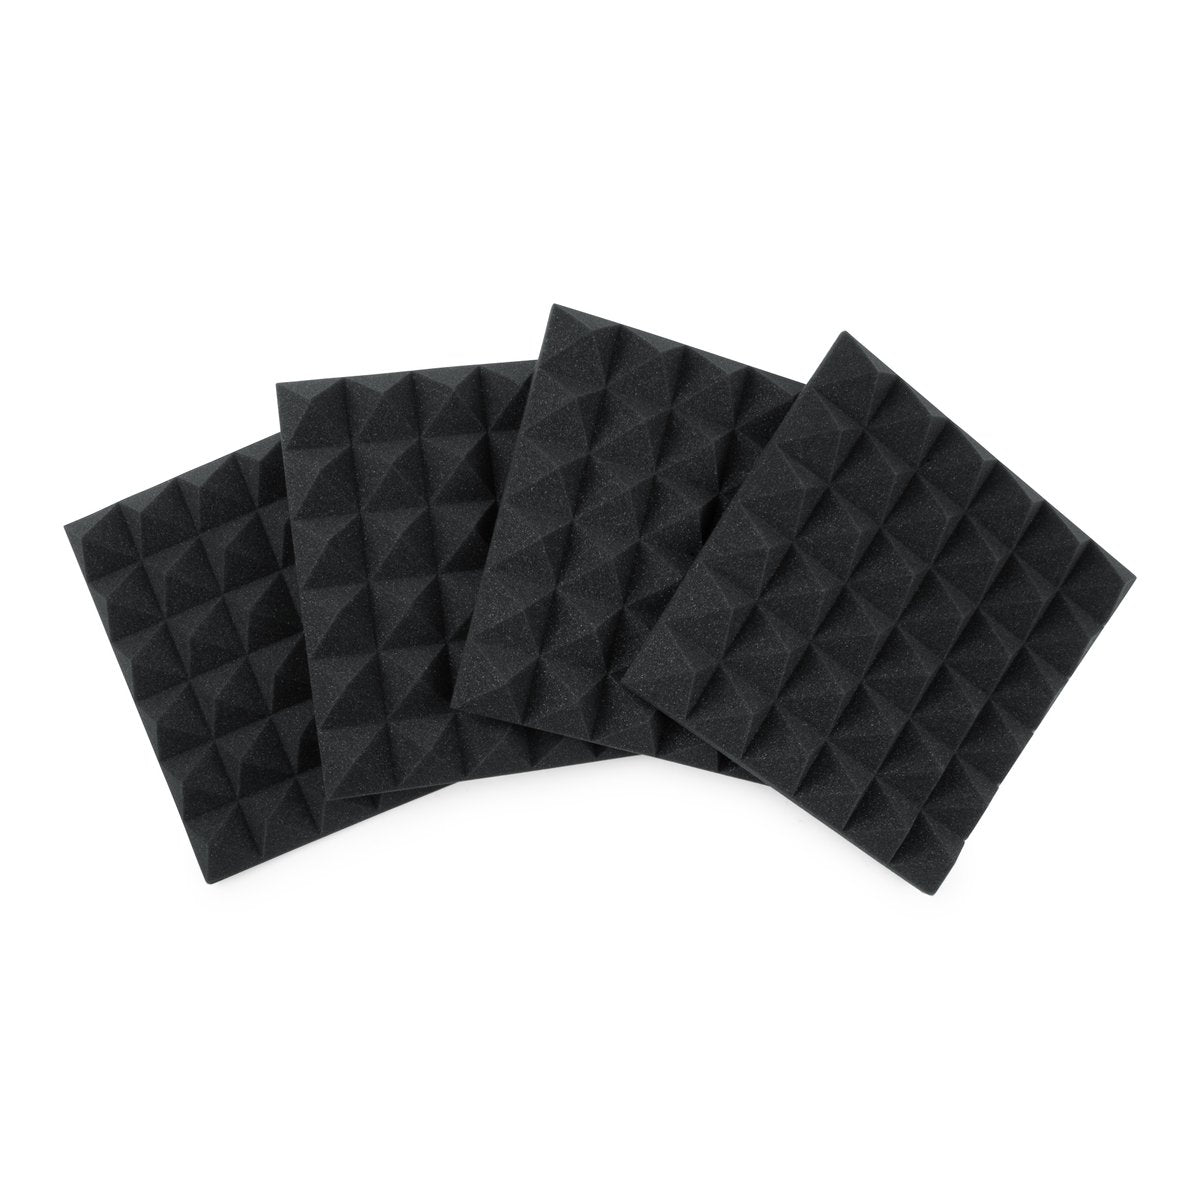 Four (4) Pack of 2”-Thick Acoustic Foam Pyramid Panels 12”x12” – Charcoal Color